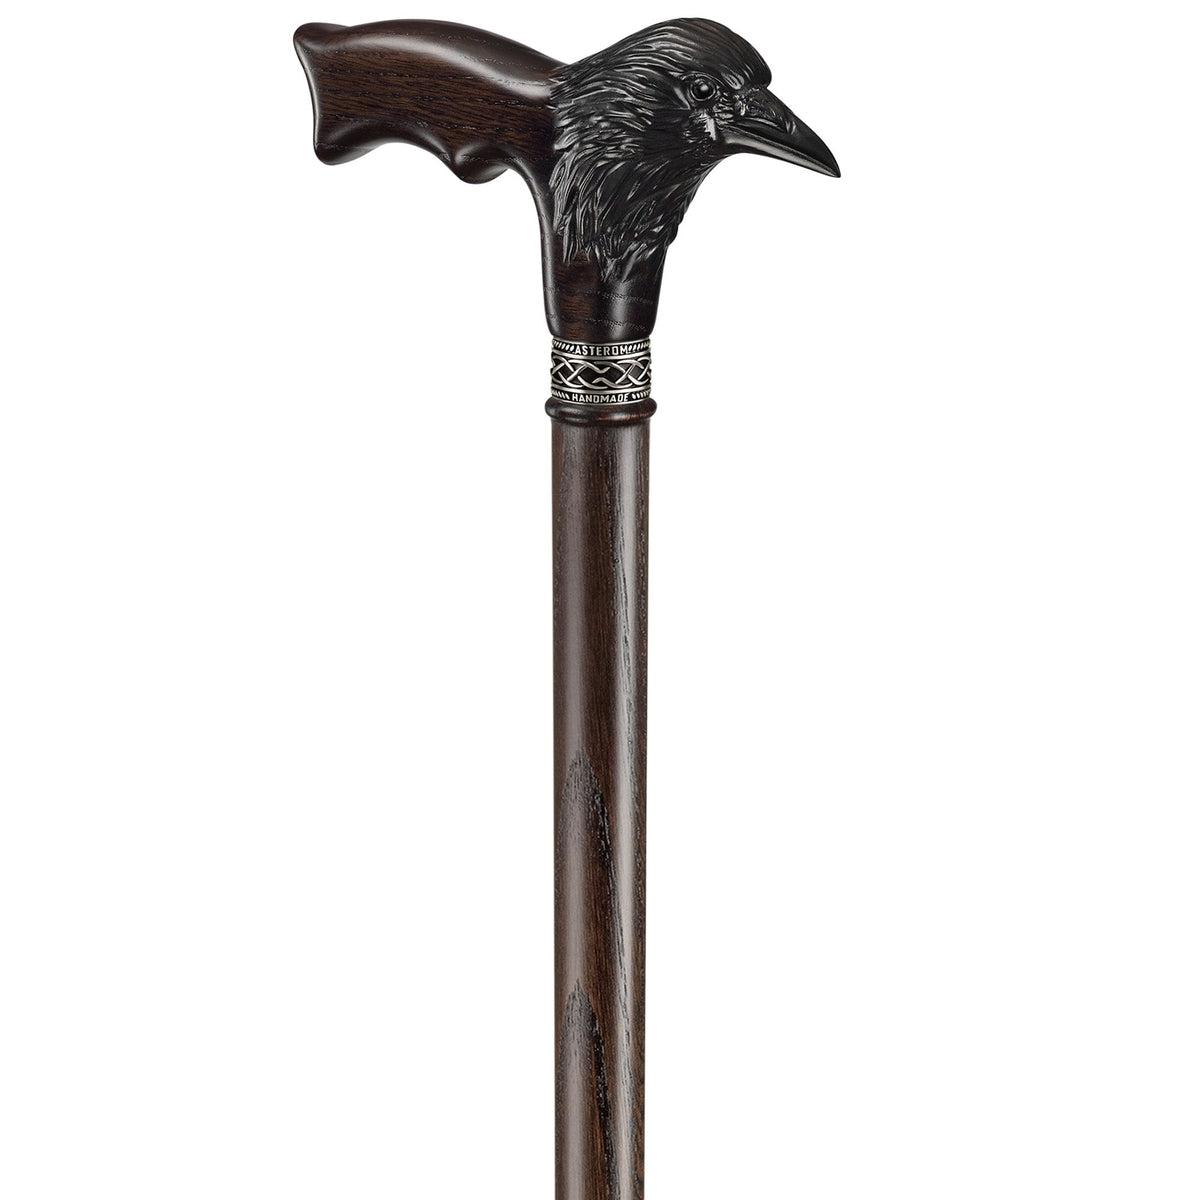 Fashionable Hand Carved Wooden Black Raven Cane Or Crow Walking Stick